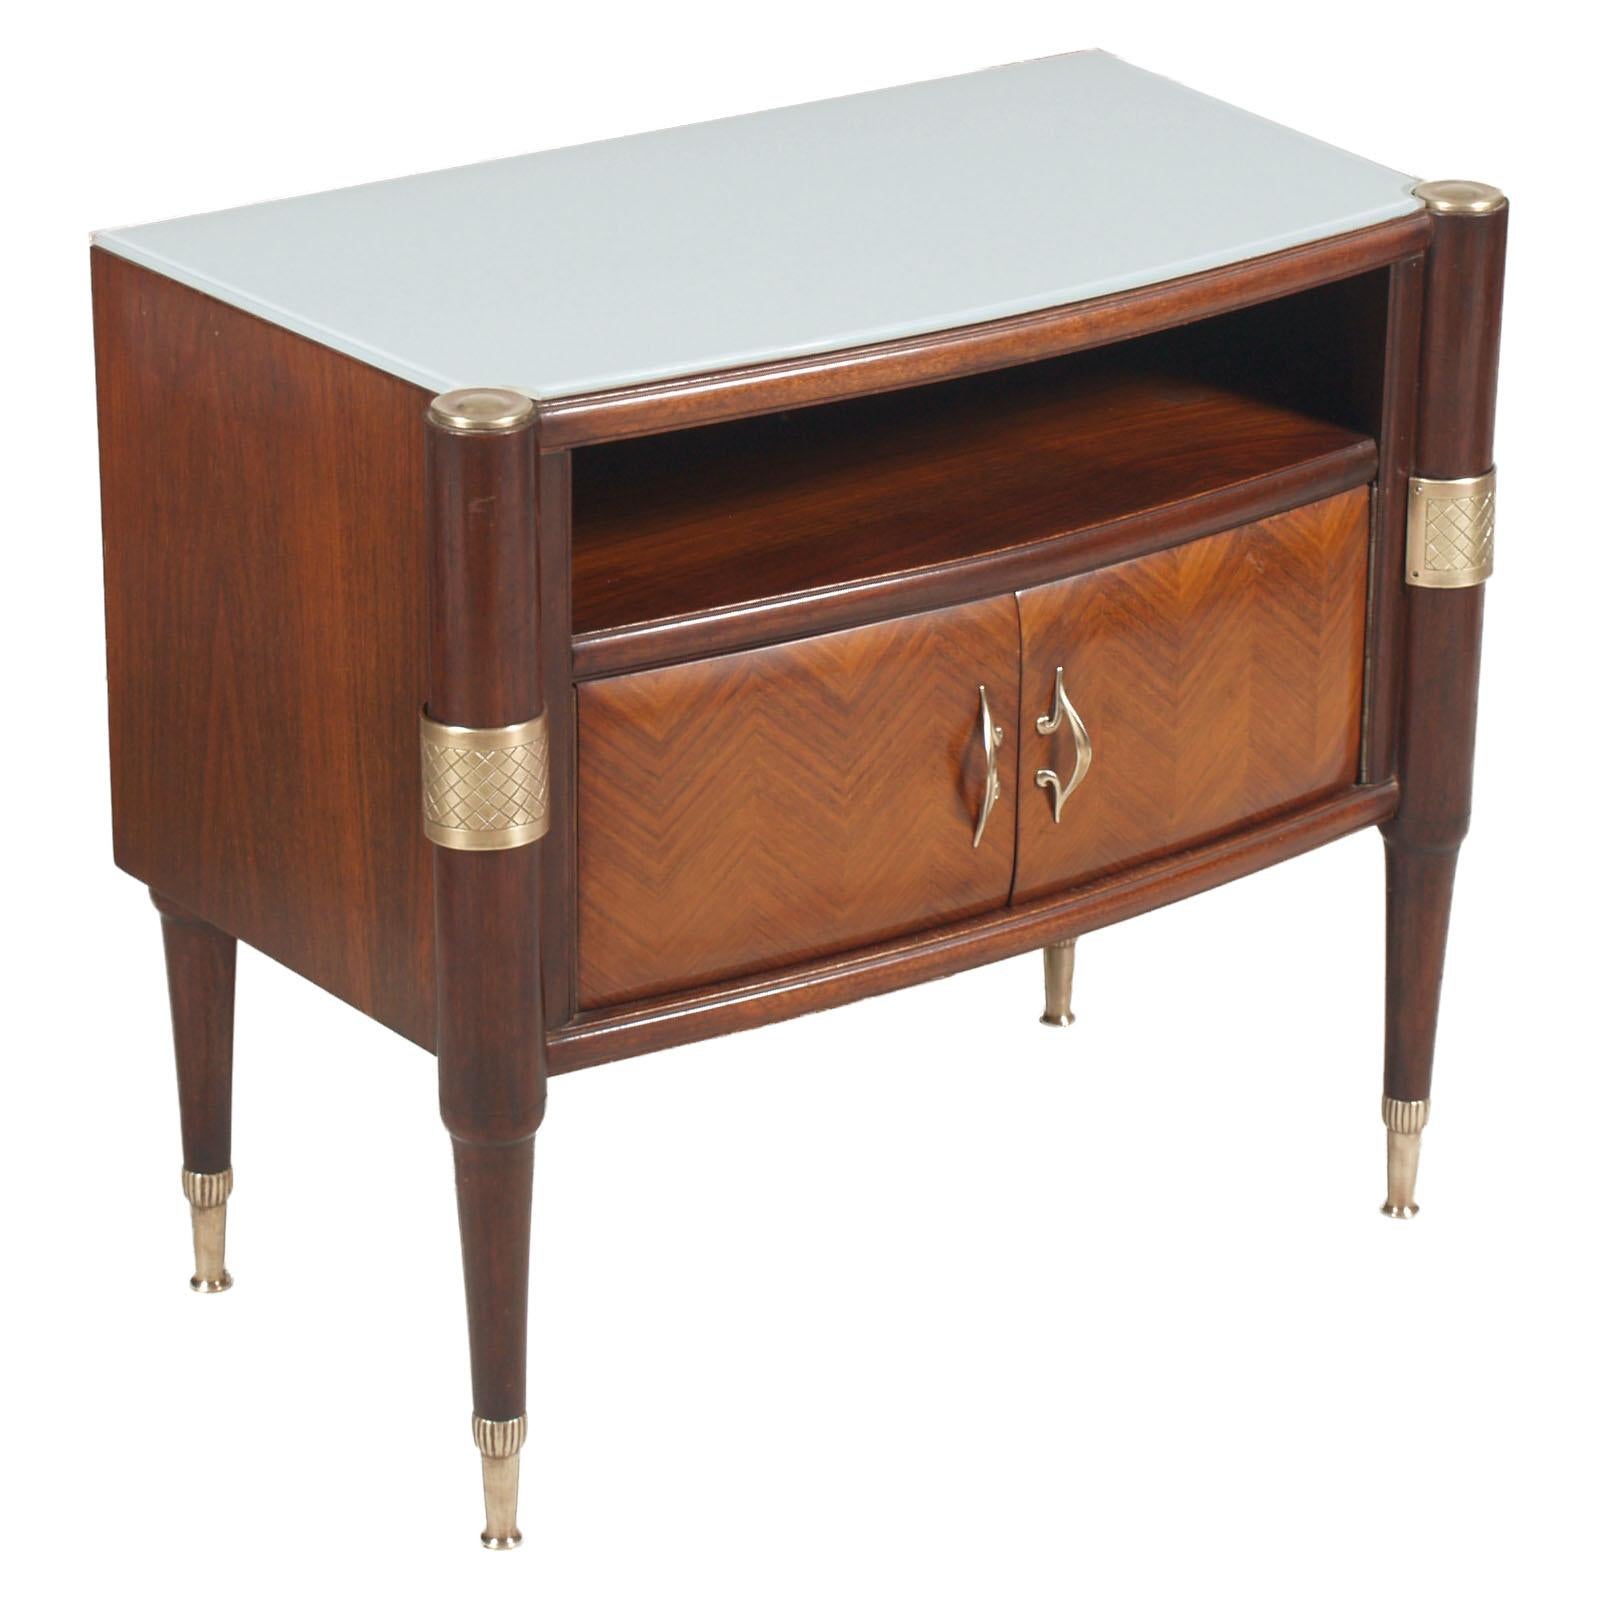 Elegant 1950s Italy Mid-Century Modern pair of nightstands, La Permanente Mobili Cantù, by Pier Luigi Colli . All in wood of mahogany, solid and veneered, with golden brass fittings; top in lacquered glass. Wax polished. 
On request we can sell the